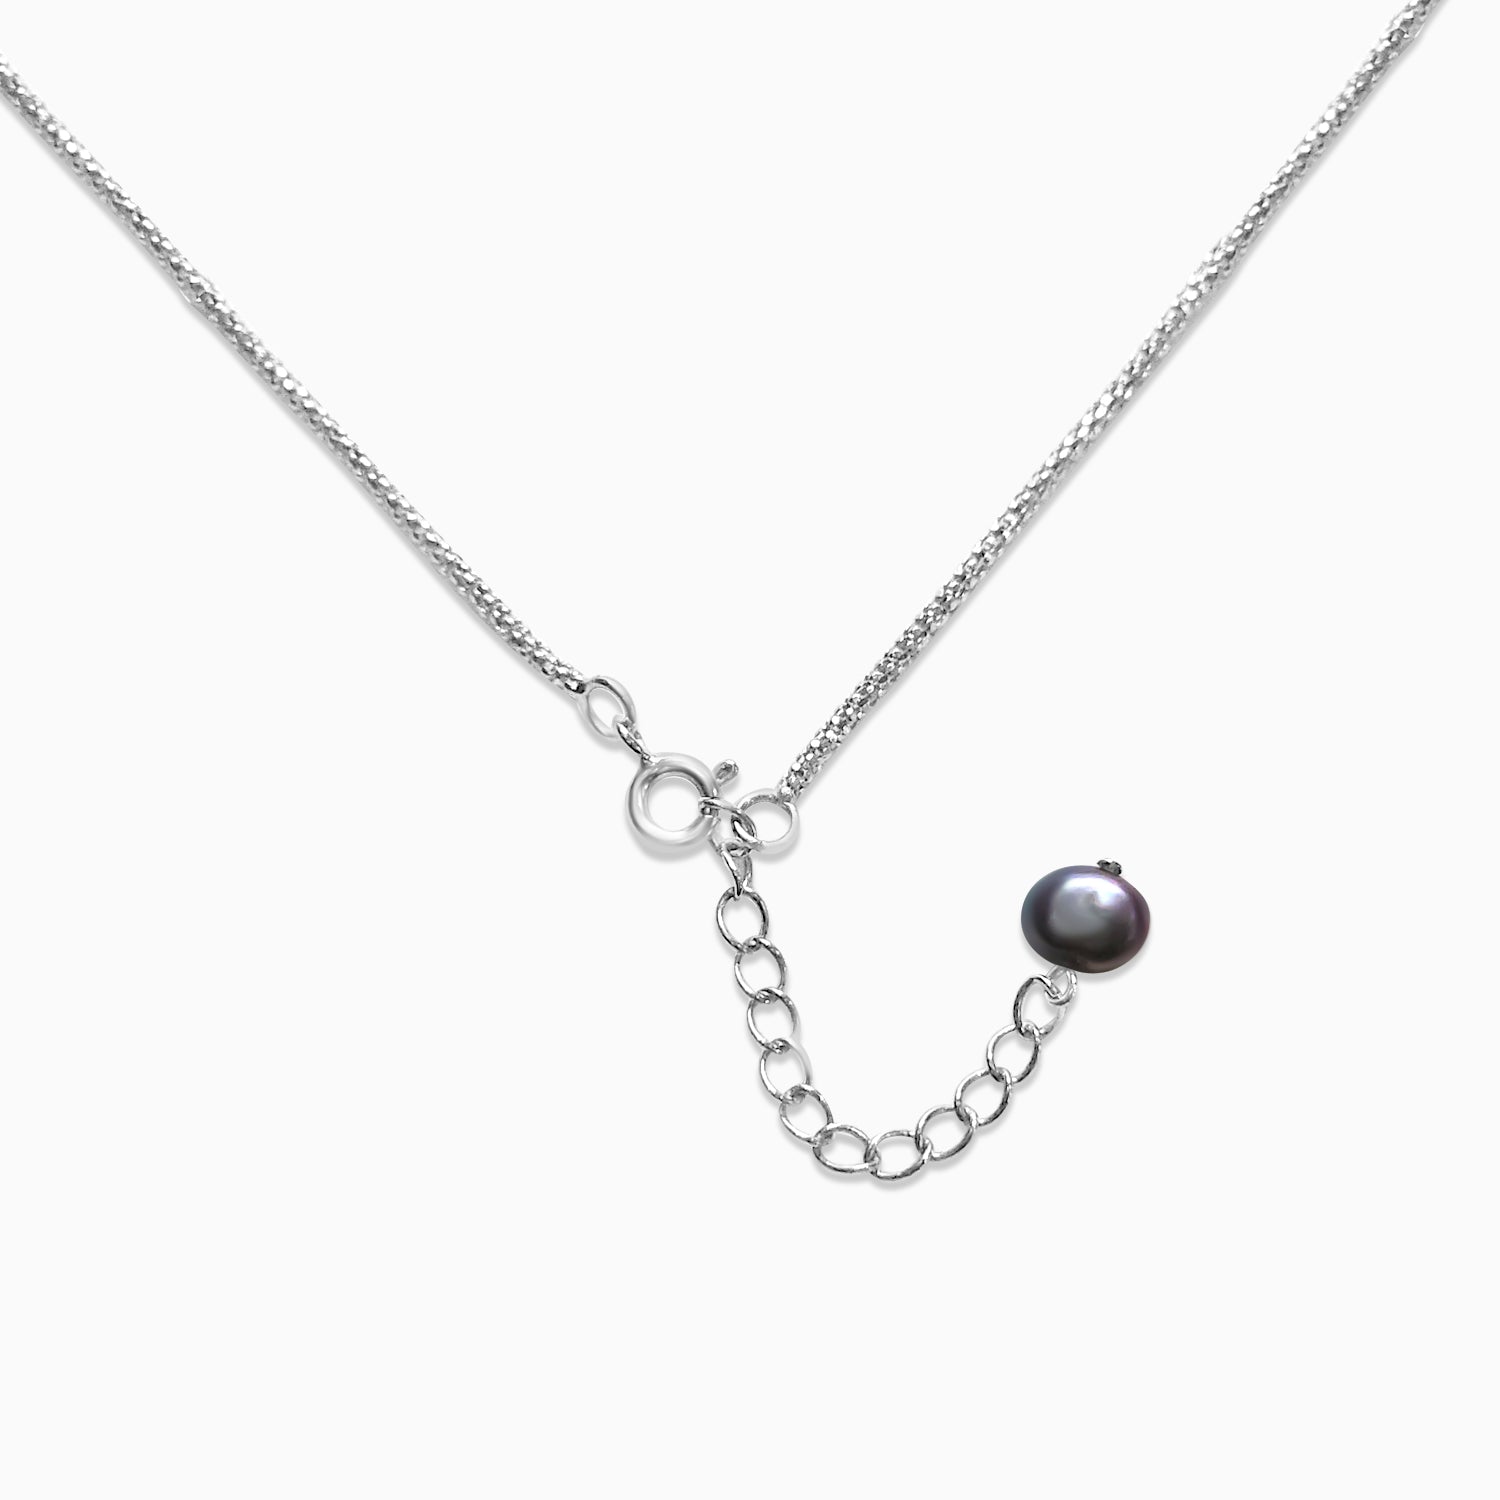 Silver Knotted Italian Chain Black Pearl Necklace